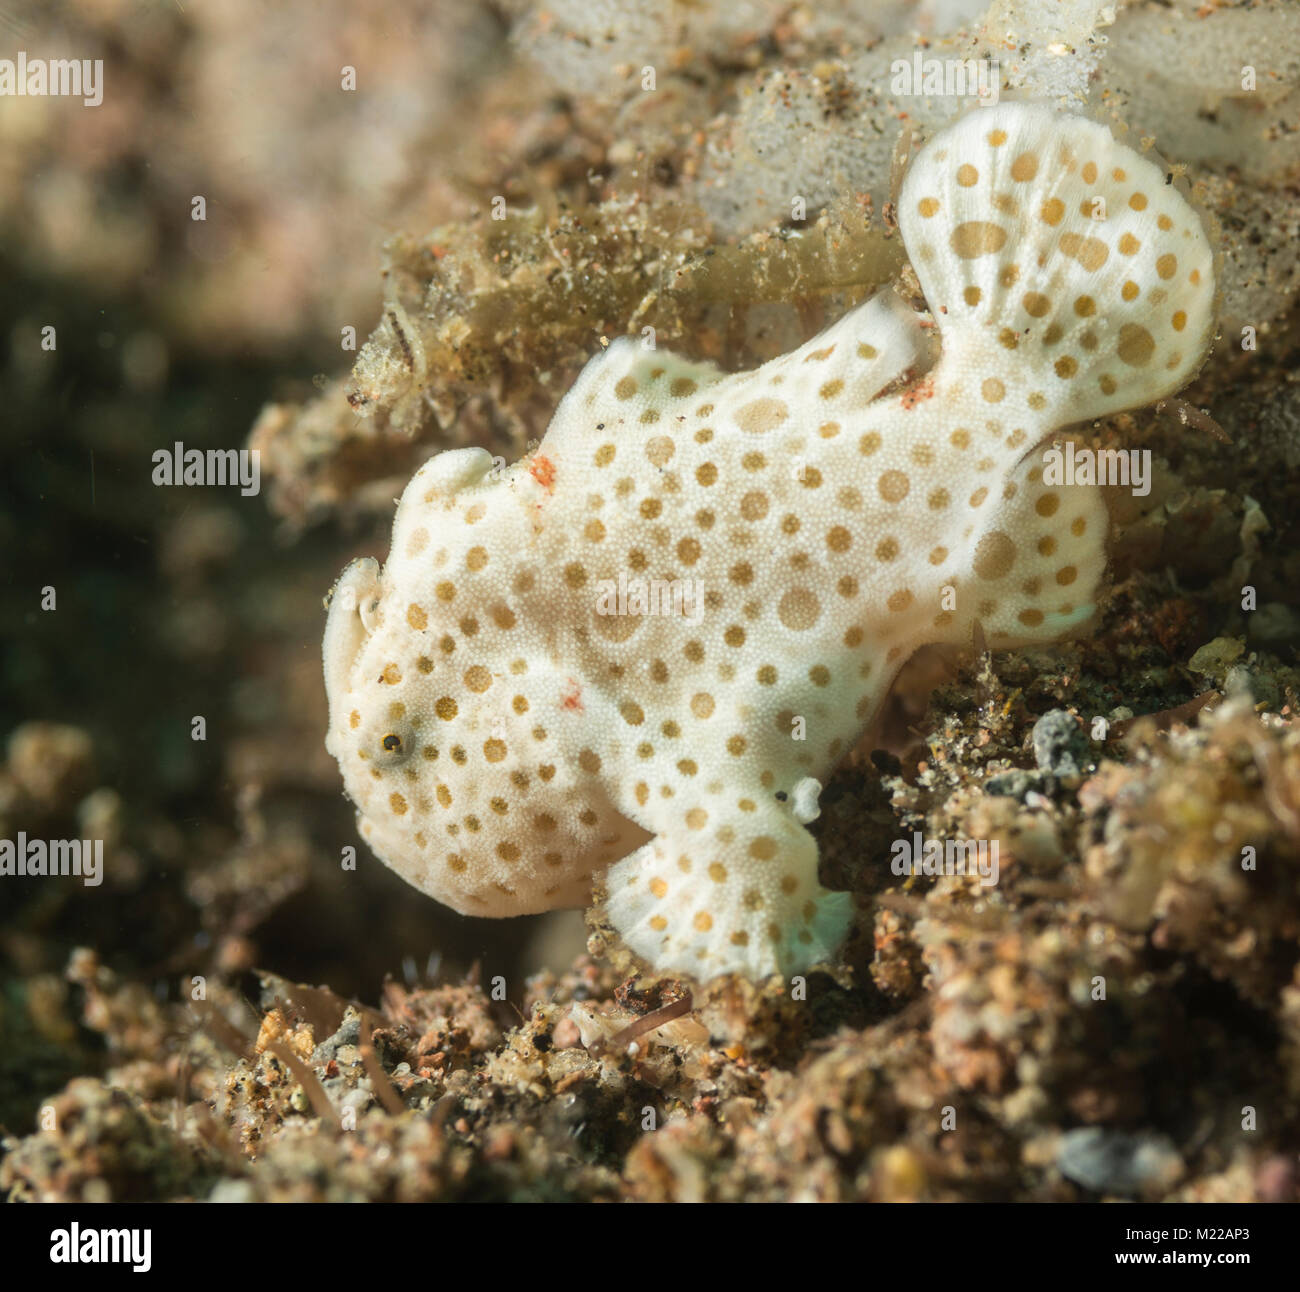 Juvenile painted frogfish on the sea floor Stock Photo